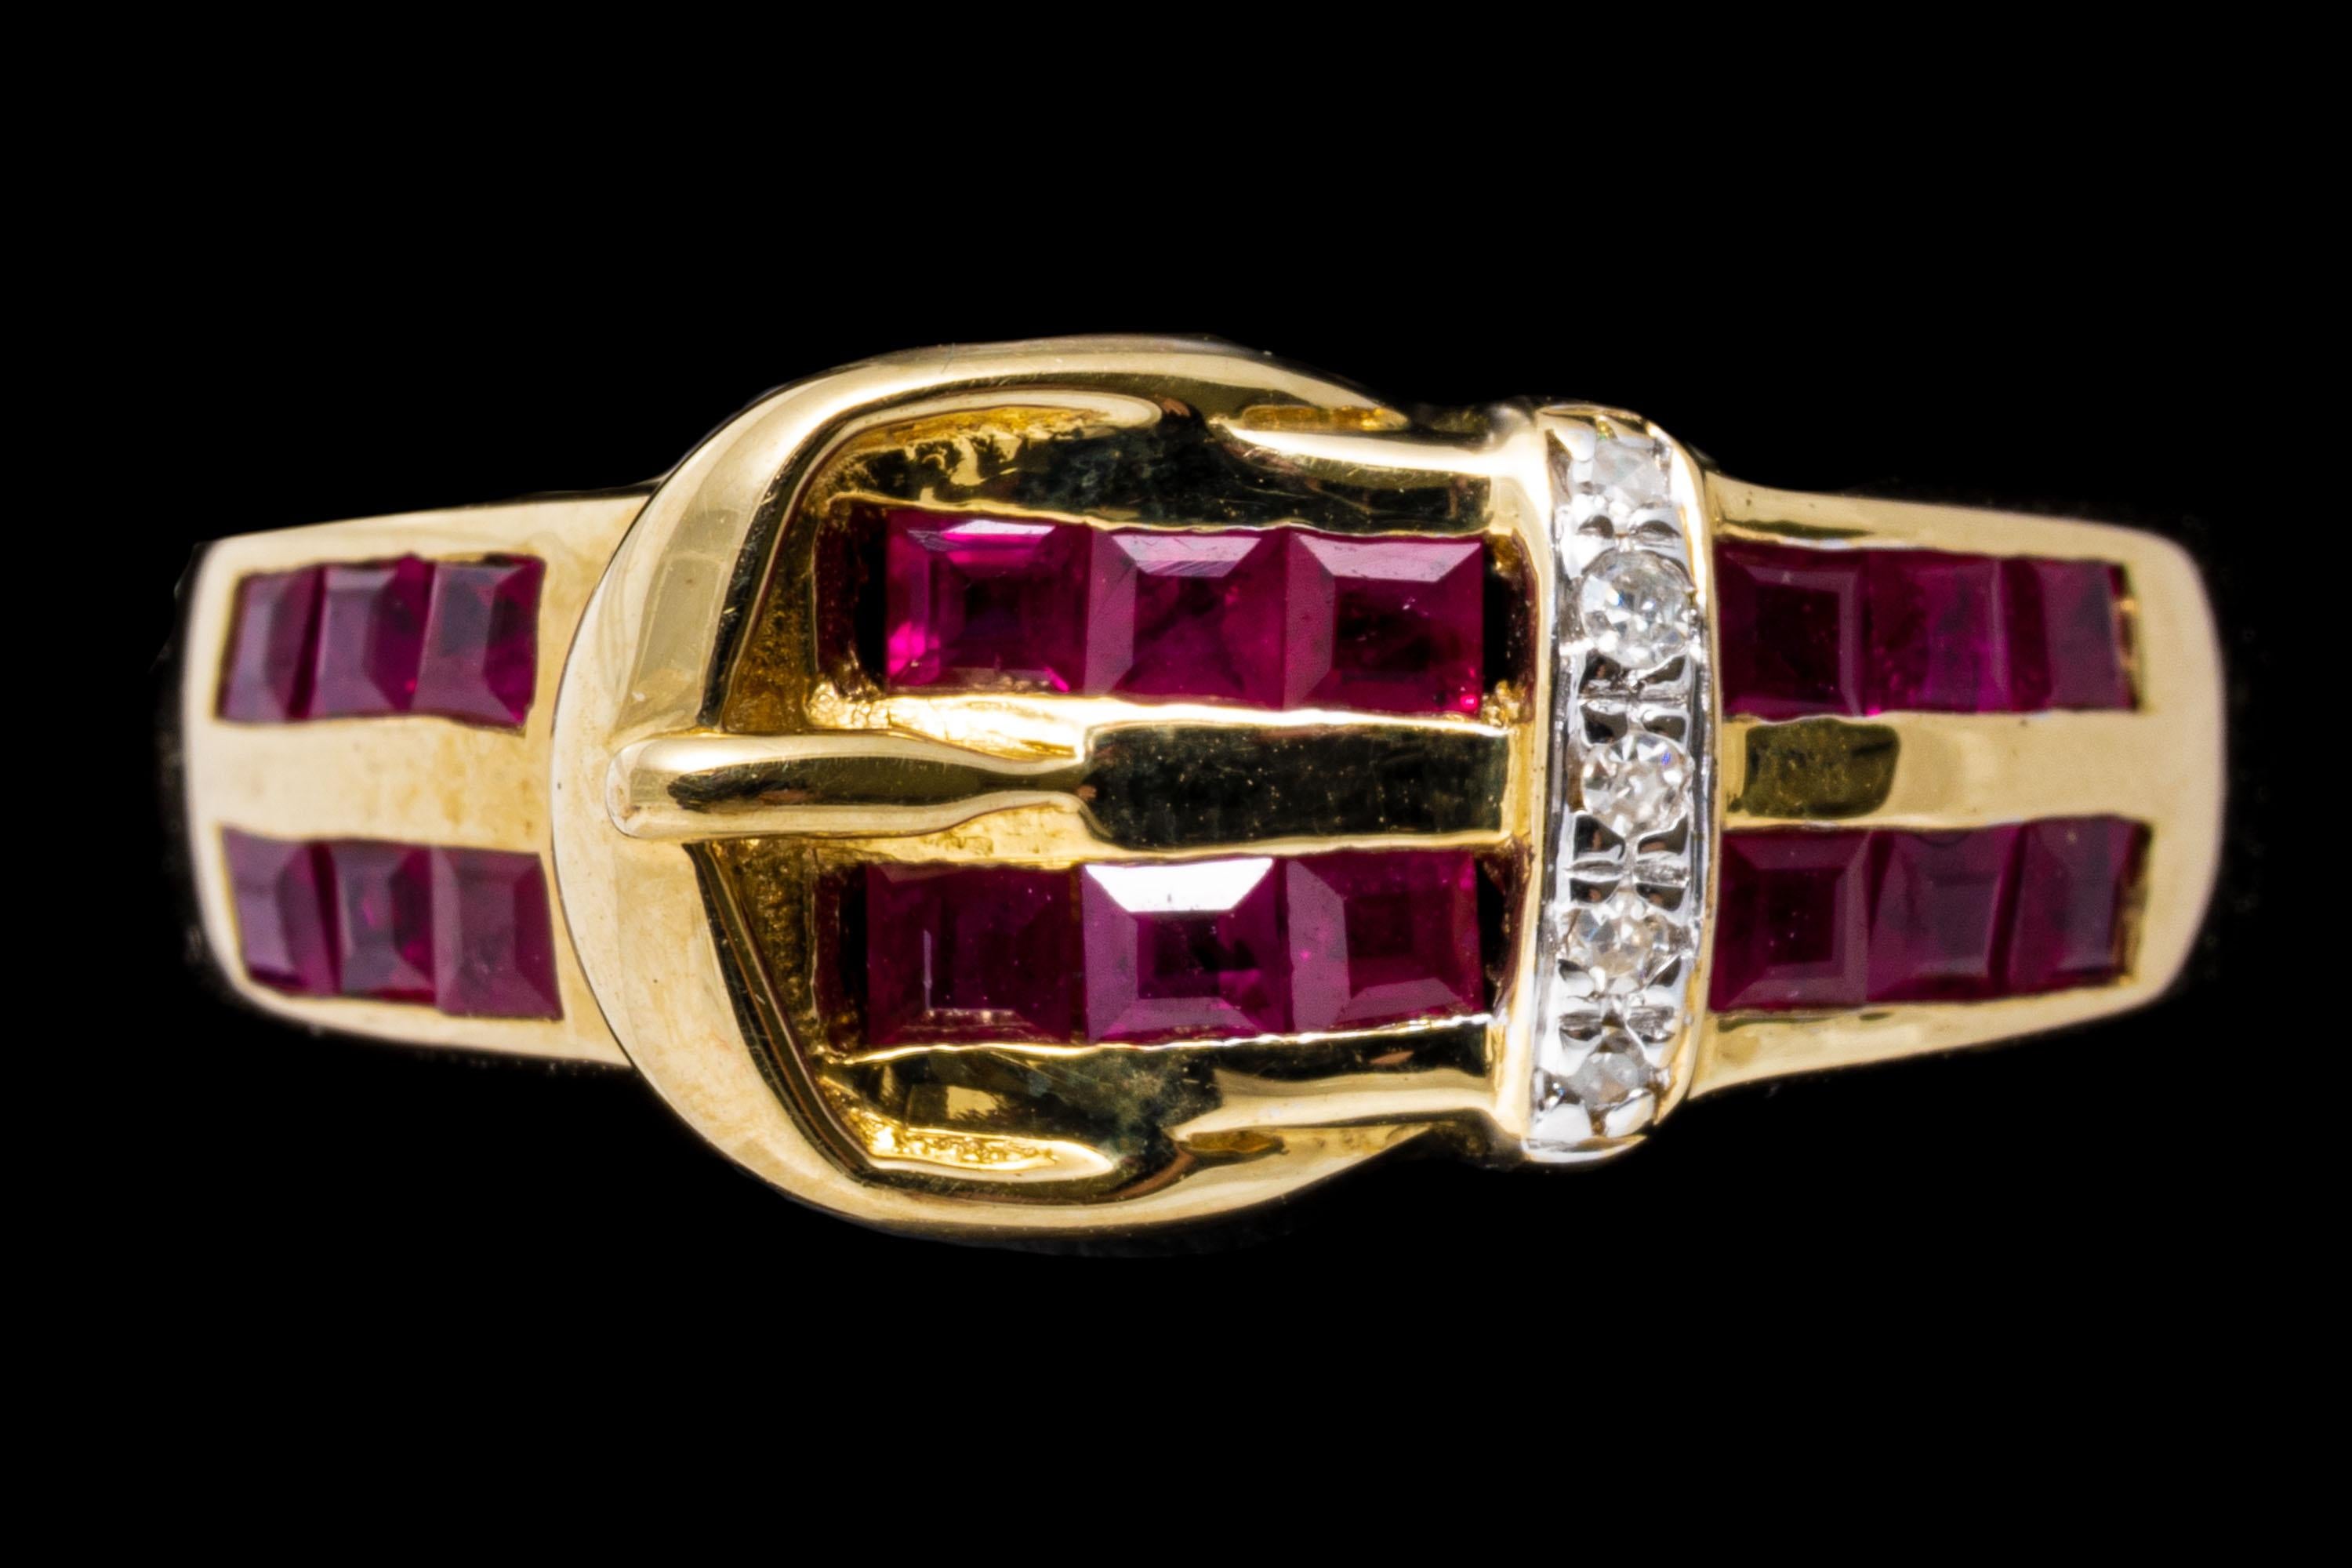 14k yellow gold ring. This handsome ring is a buckle style, set with two rows of square faceted, pinkish red rubies, approximately 0.72 TCW, channel set, and decorated with a gold buckle motif and a belt loop decorated with round faceted diamonds,